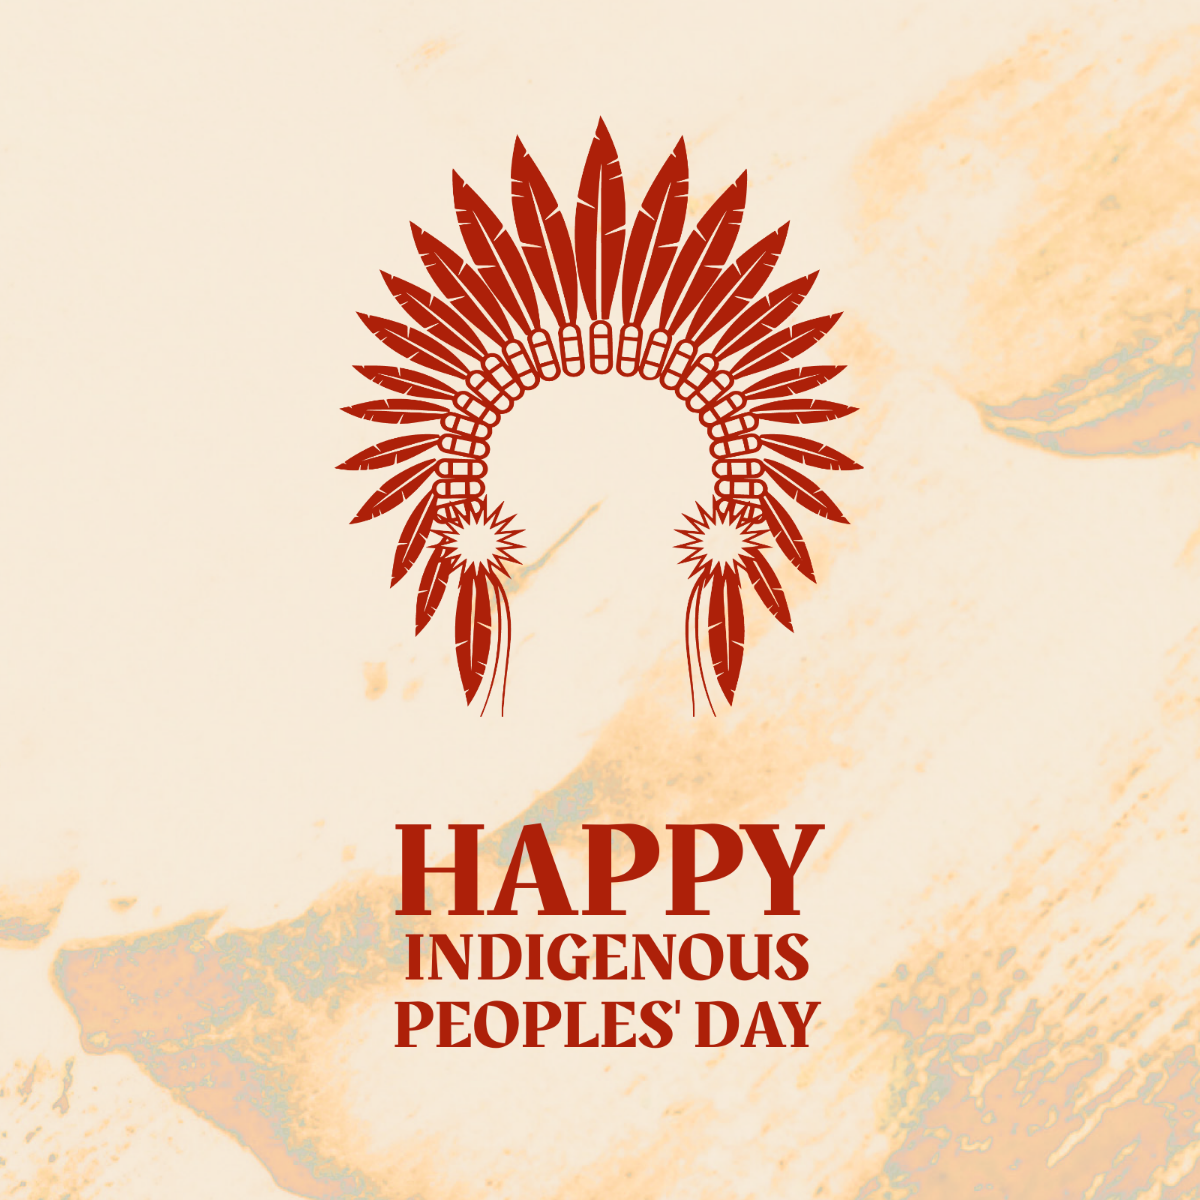 Indigenous Peoples' Day WhatsApp Post